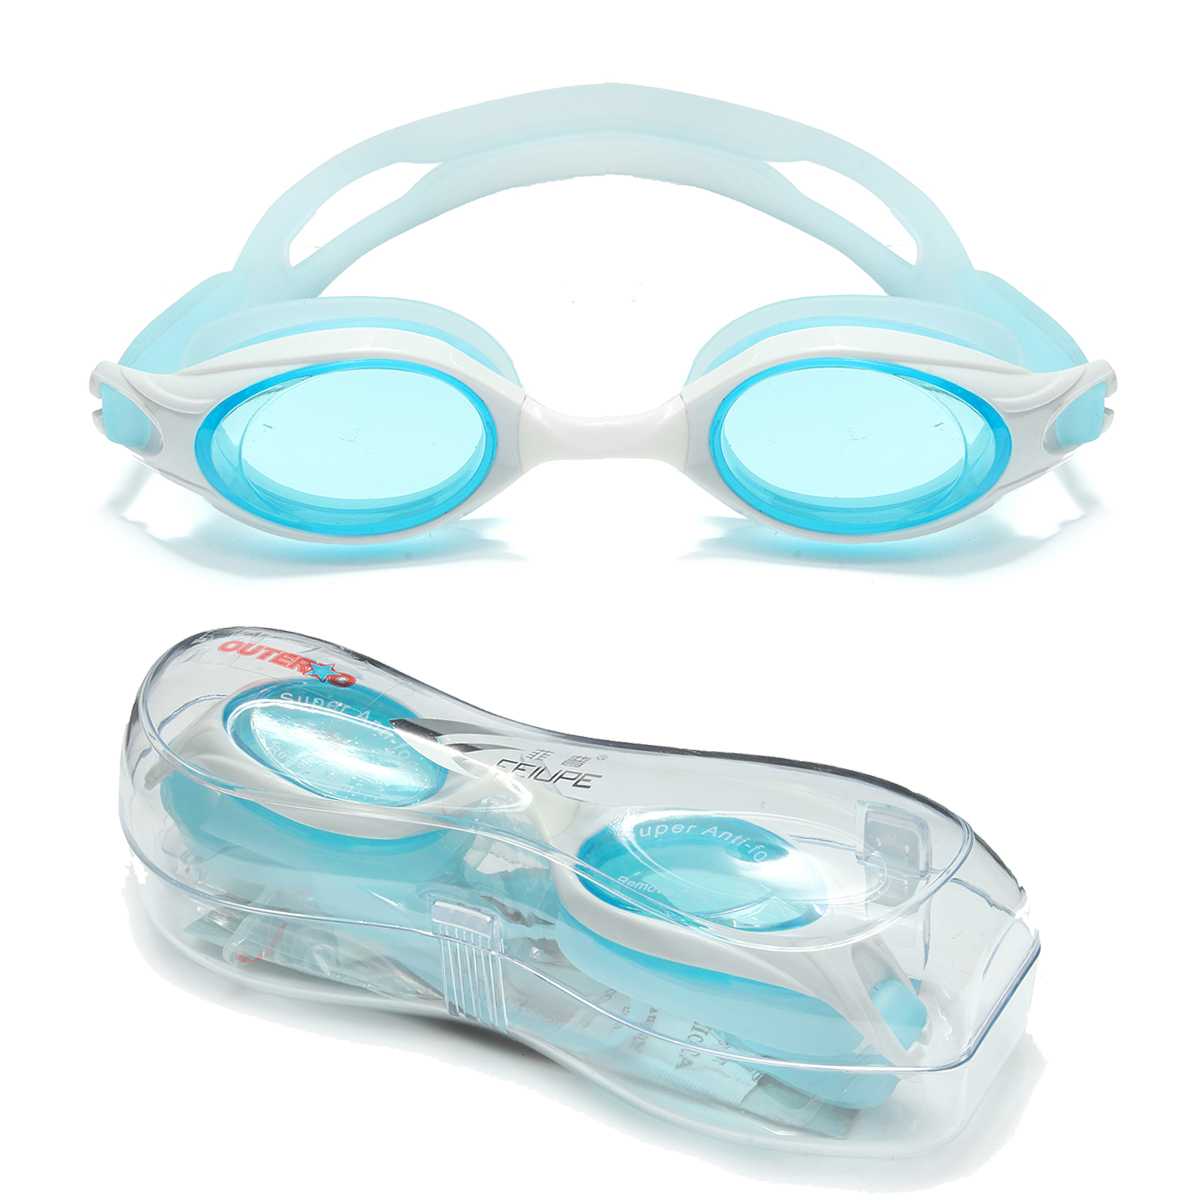 OUTEROO-Swimming-Glasses-PC-Silicone-Shockproof-Anti-fog-Anti-UV-Adjustable-Swimming-Goggles-for-Adu-1886066-18